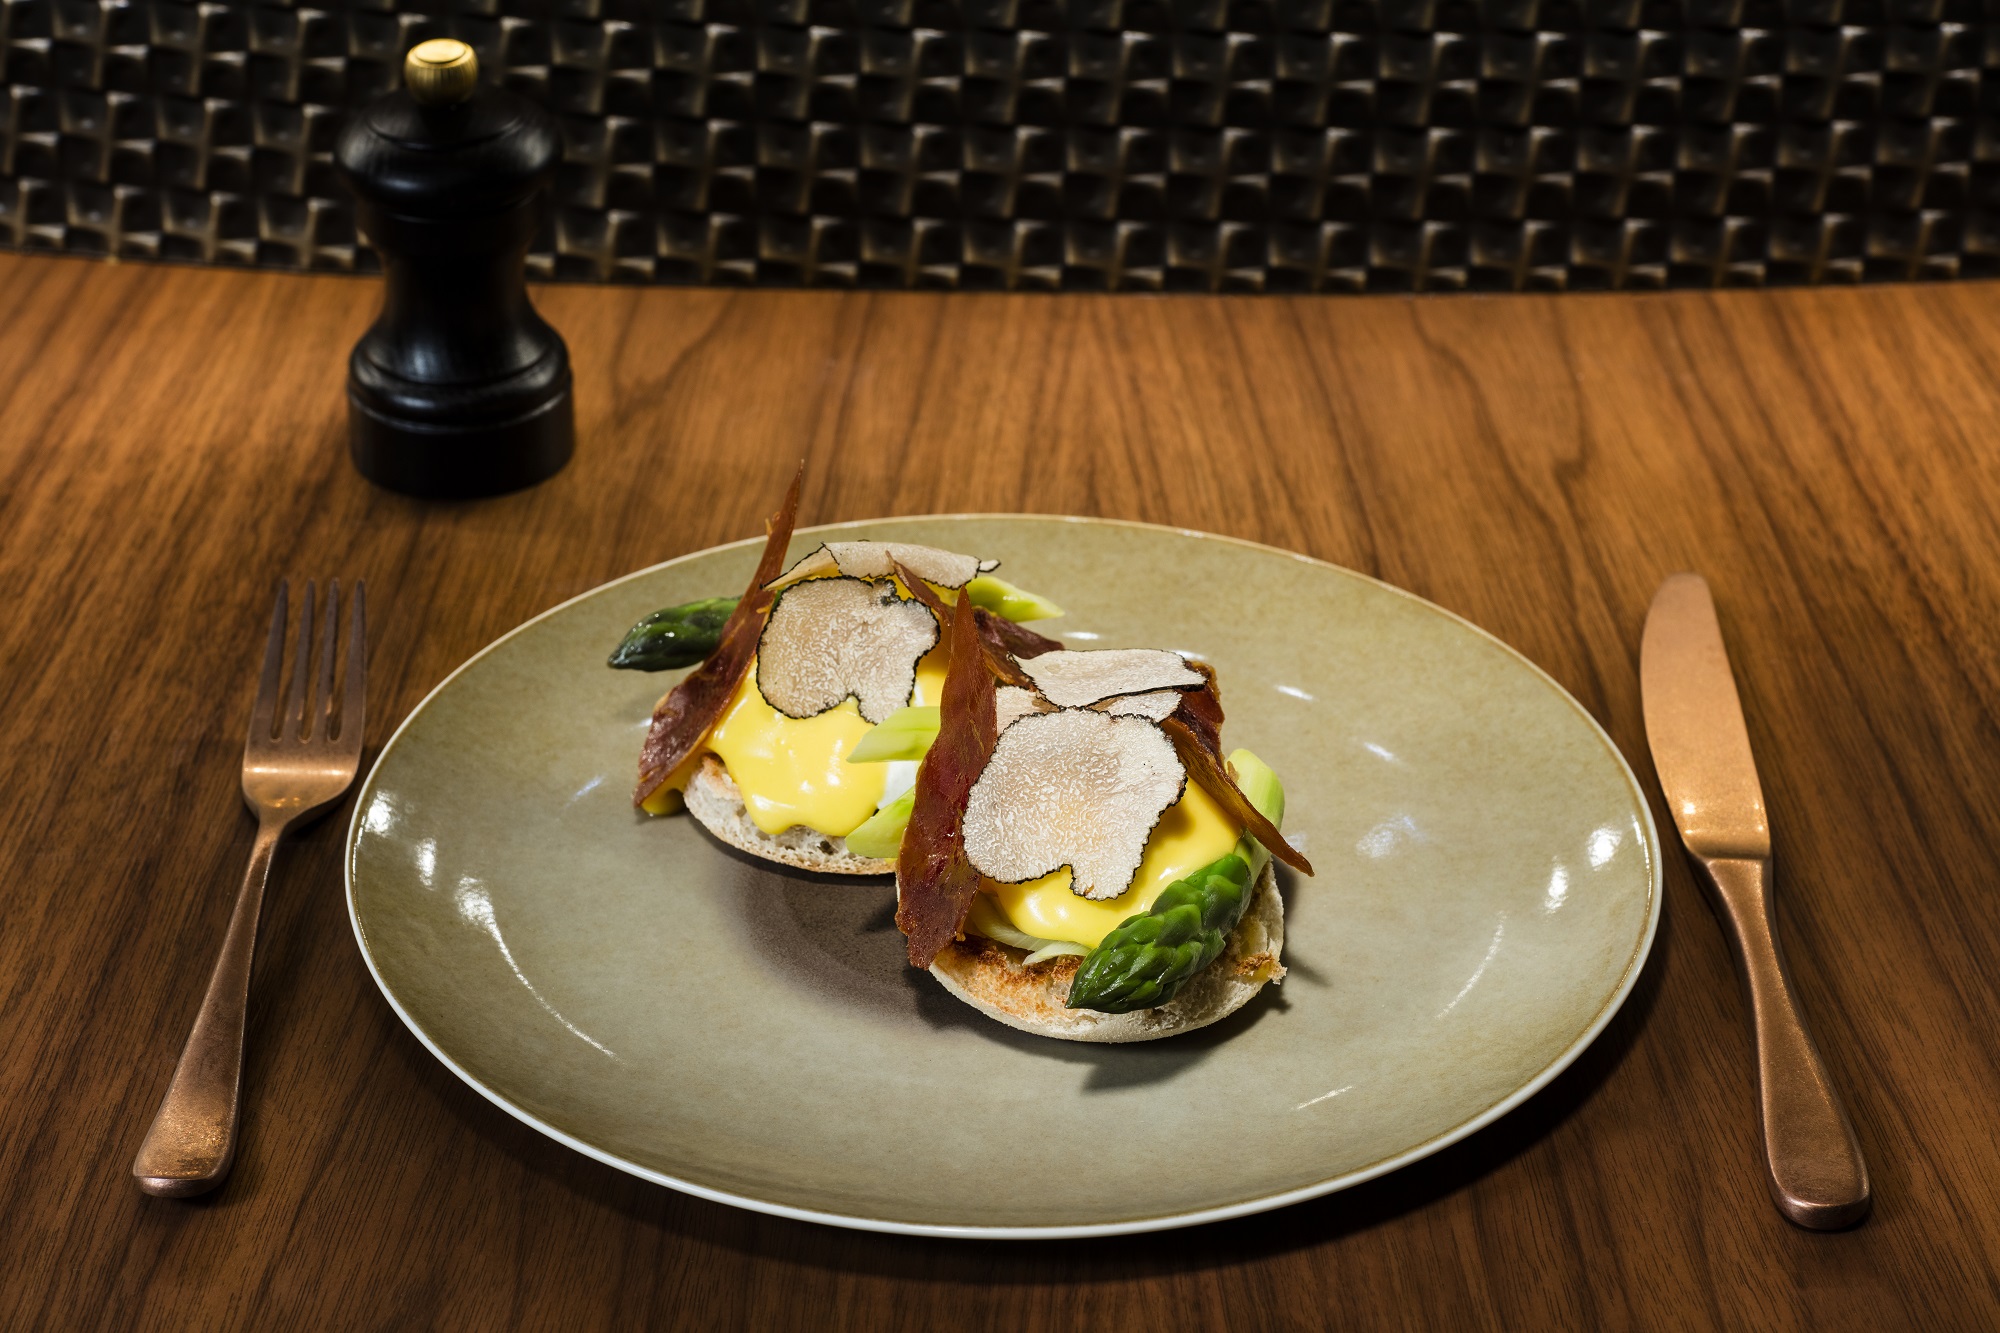 SOMM Poached Cage-free Eggs on English Muffins with Black Truffle Butter, Green Asparagus, Hollandaise Sauce & Crispy Belotta Ham (high res).jpg